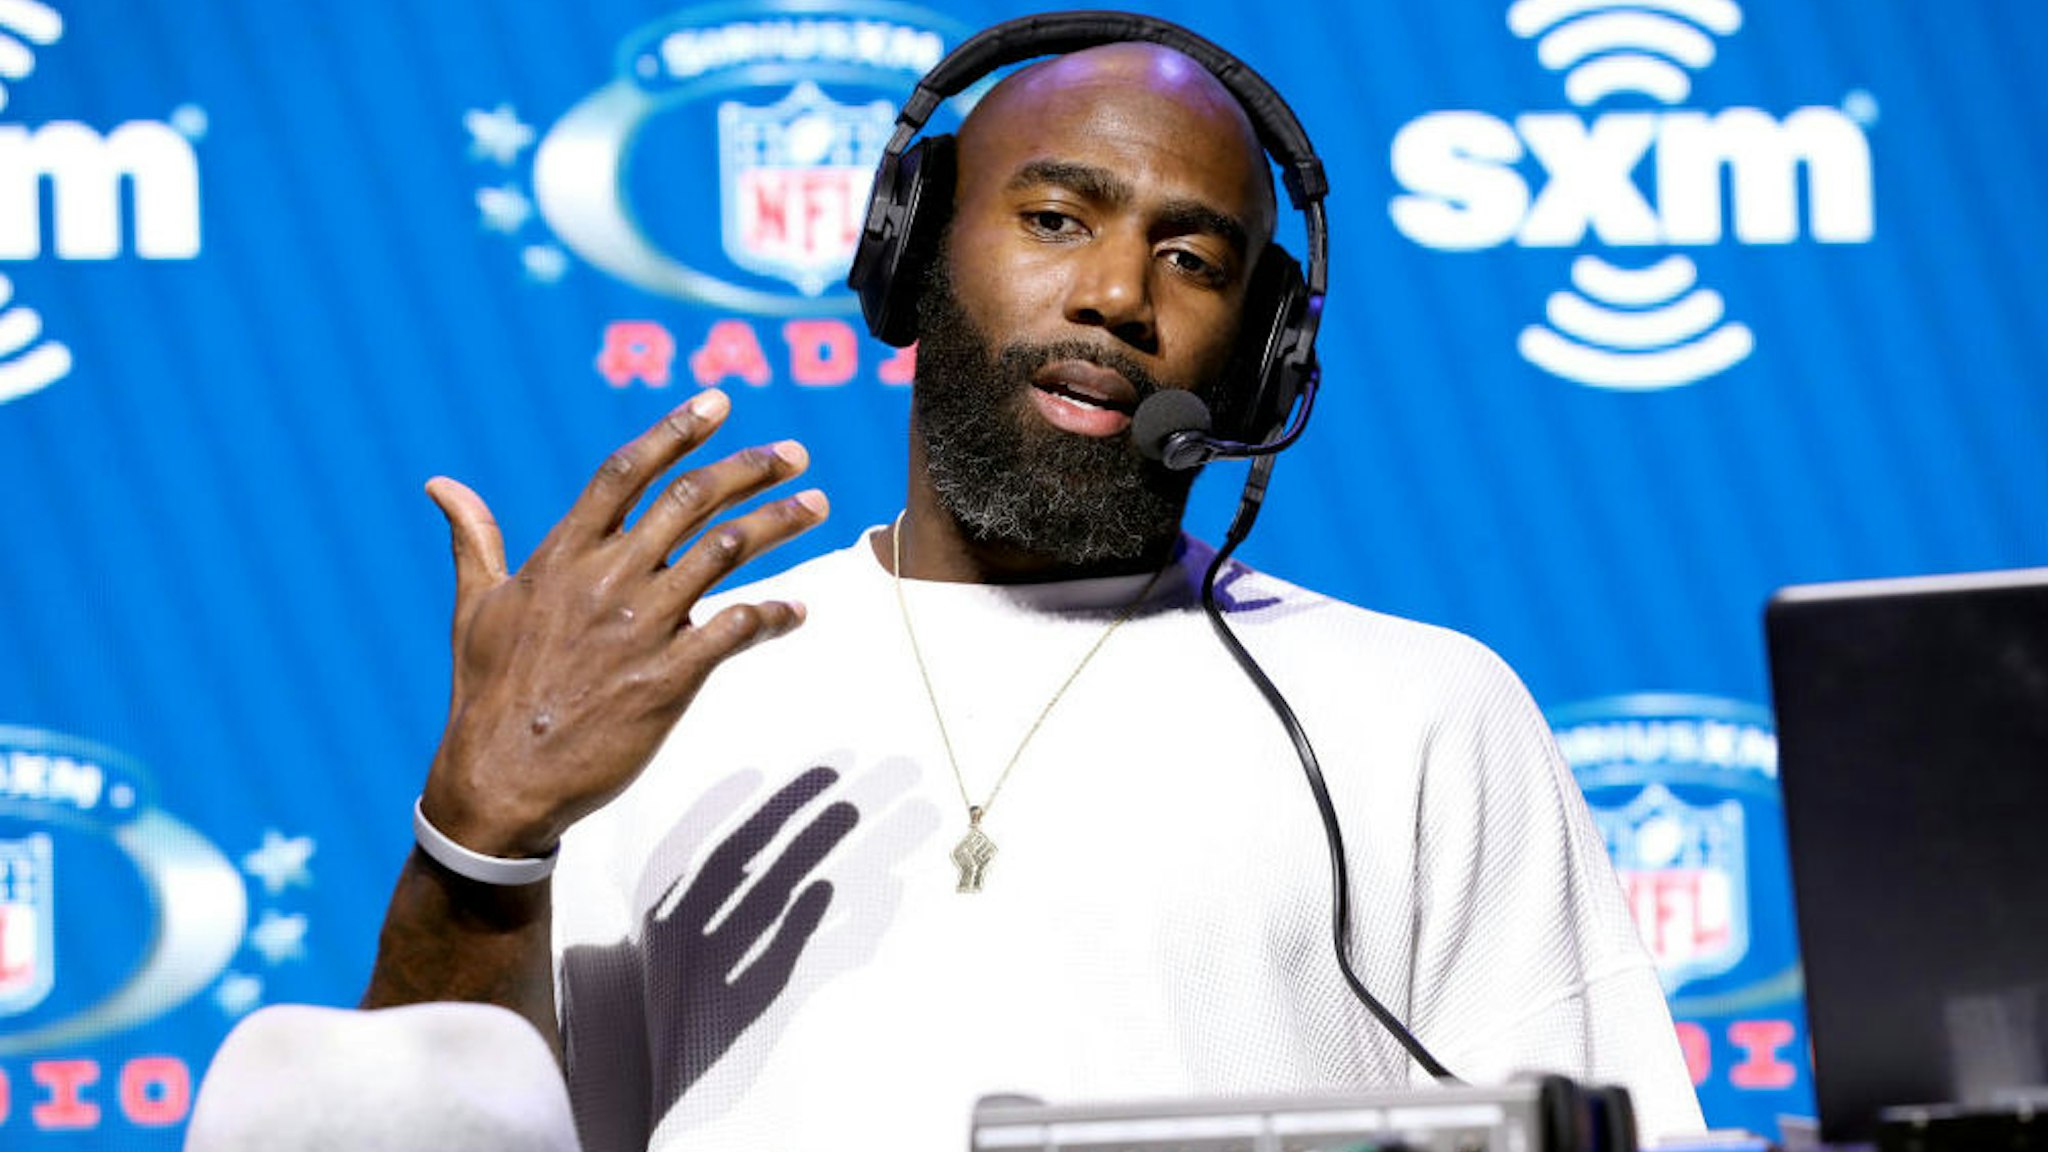 NFL safety Malcolm Jenkins of the Philadelphia Eagles speaks onstage during day 3 of SiriusXM at Super Bowl LIV on January 31, 2020 in Miami, Florida.